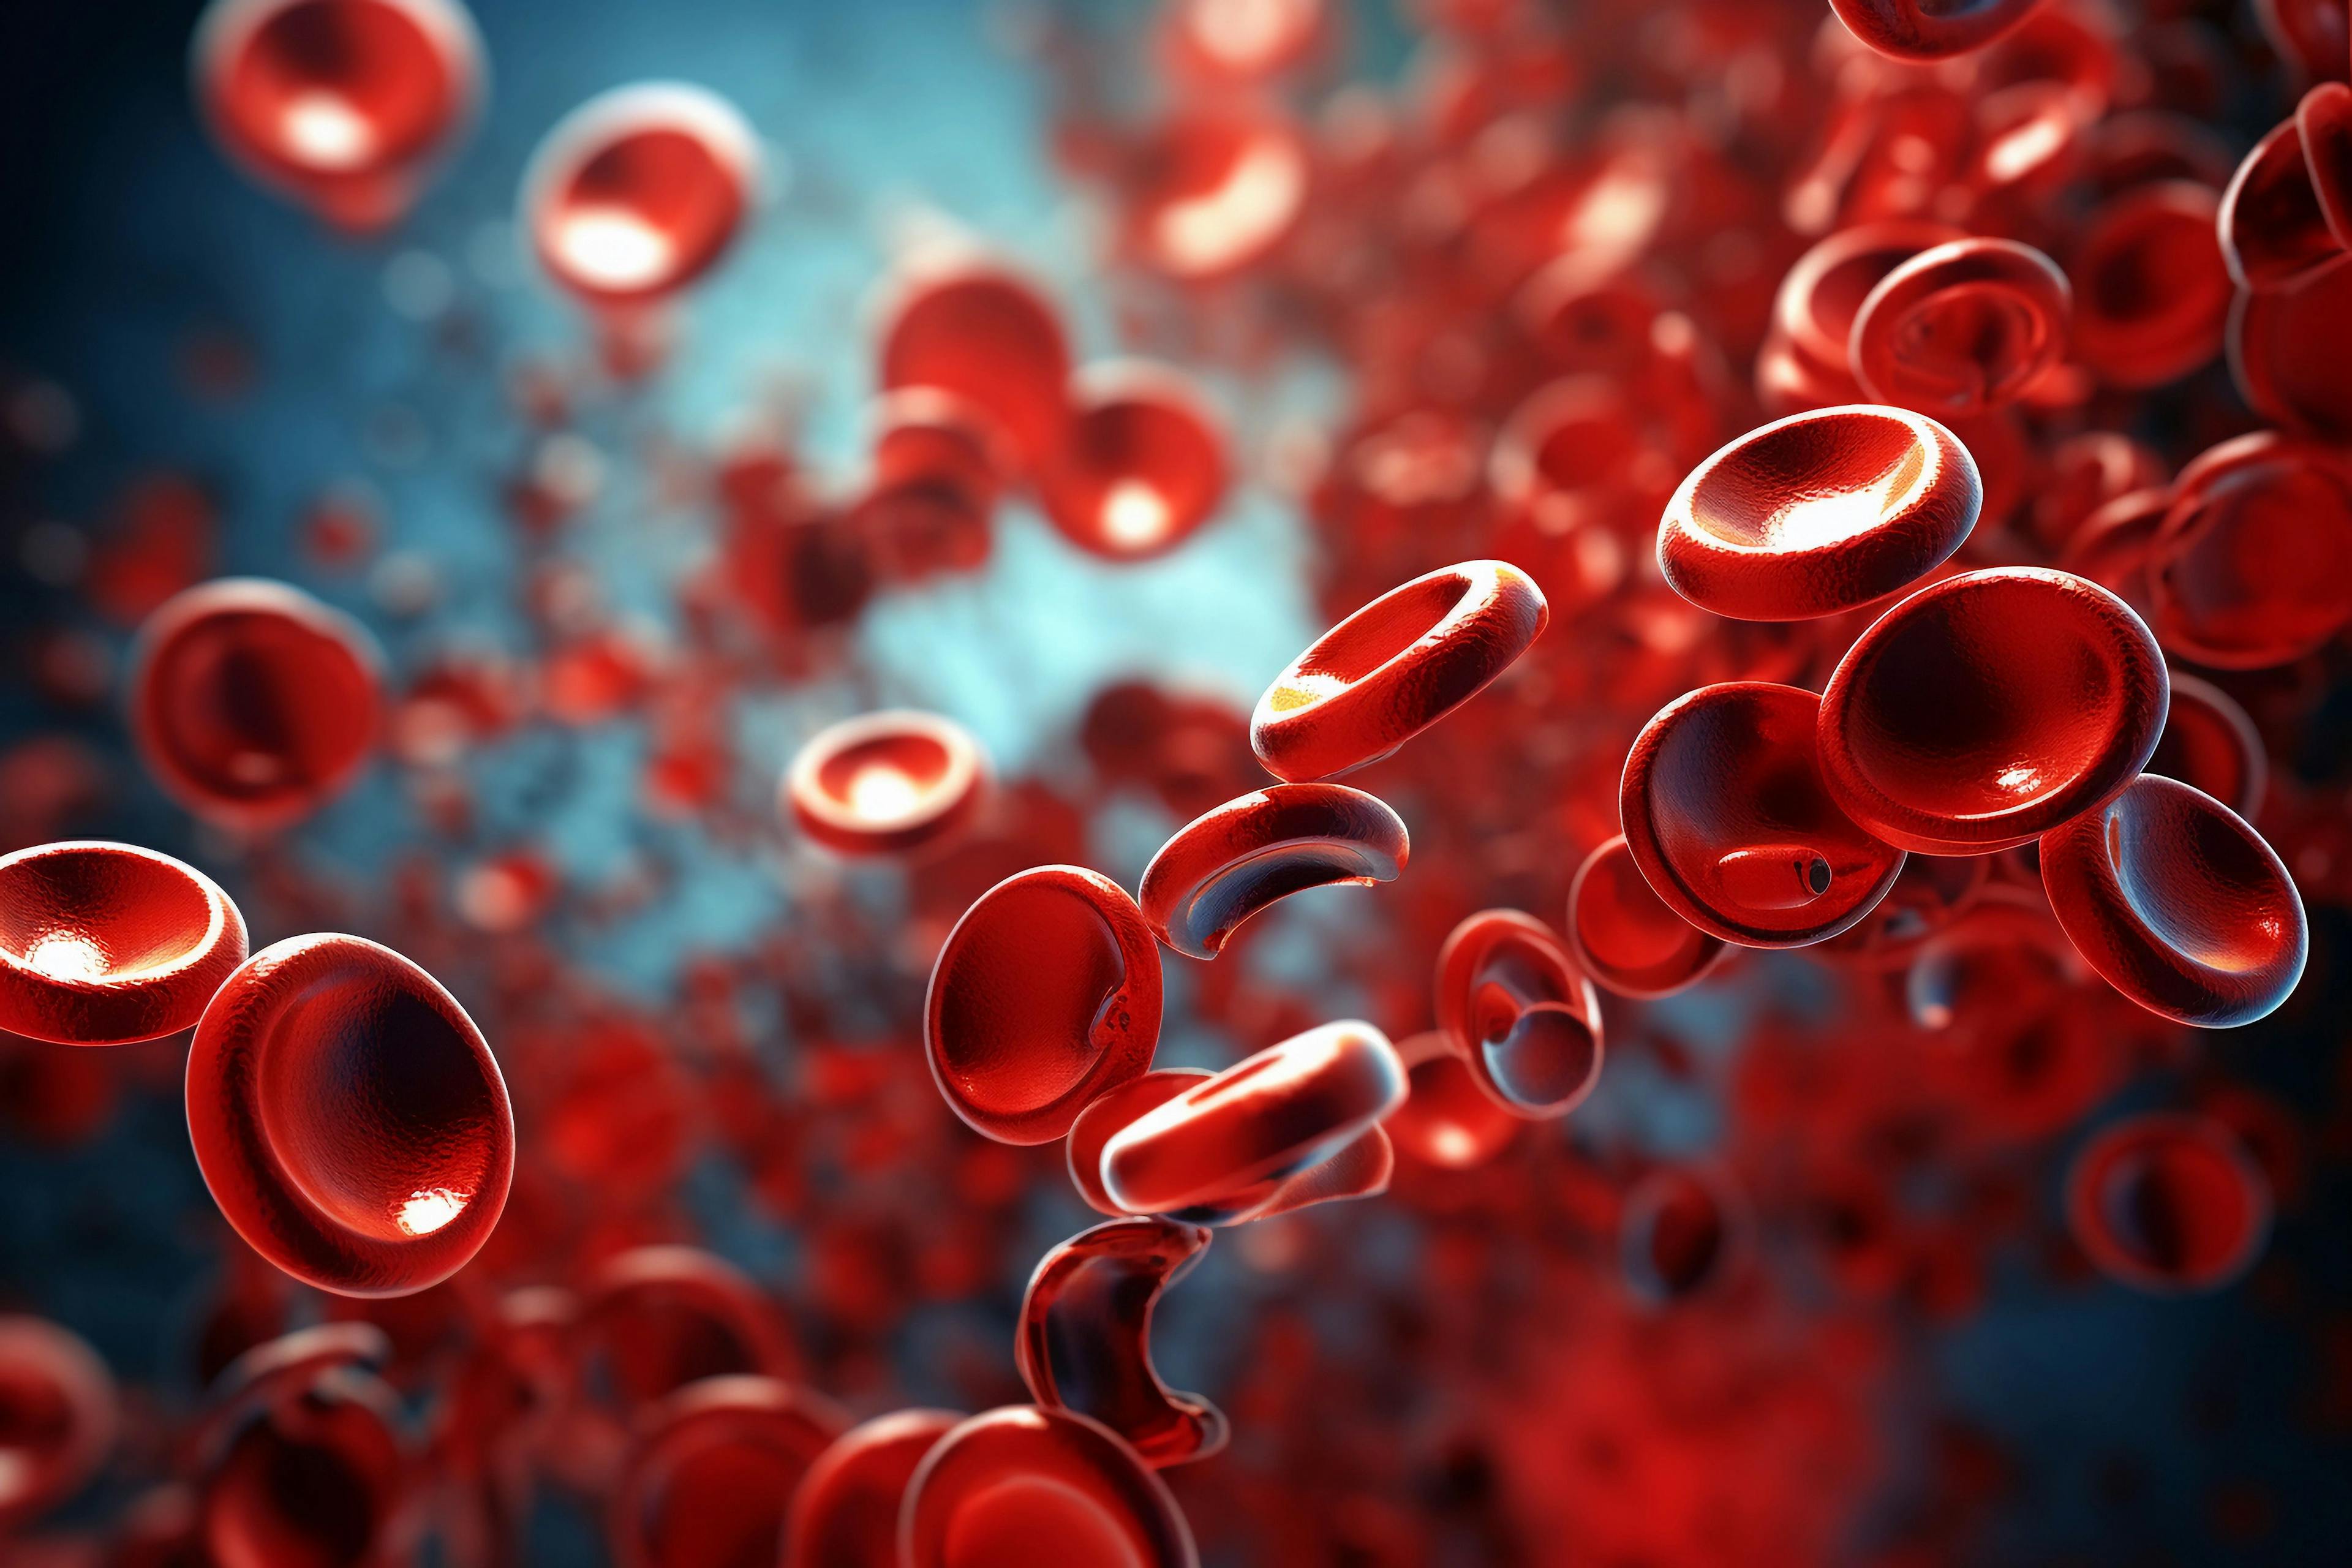 Red Blood Cell Concept | image credit: AI DREAMS - stock.adobe.com